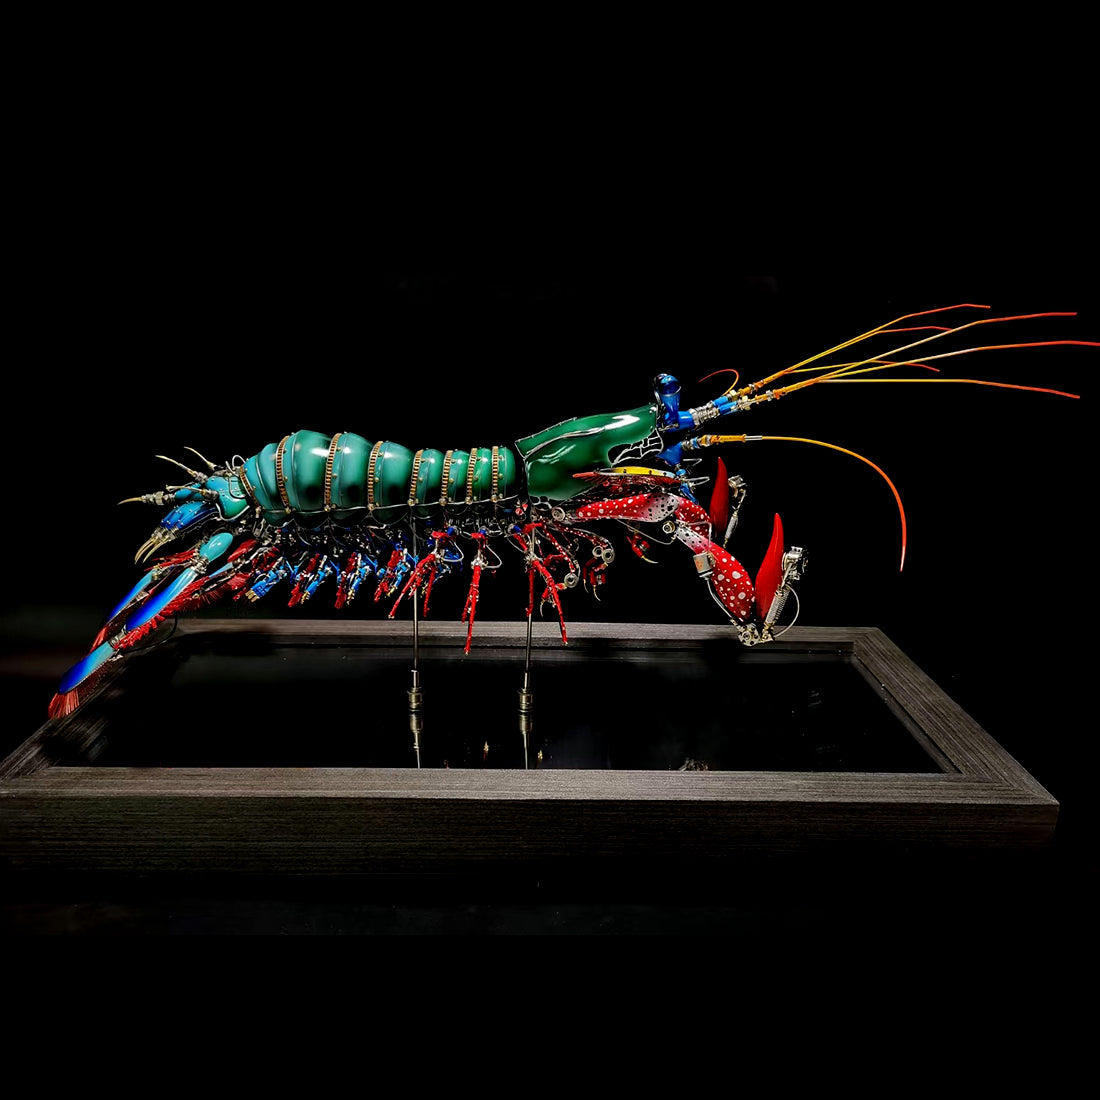 Customized 3D Metal lobster Sculpture  Assembly Model Kits Crafts for Home Decor Collection Display